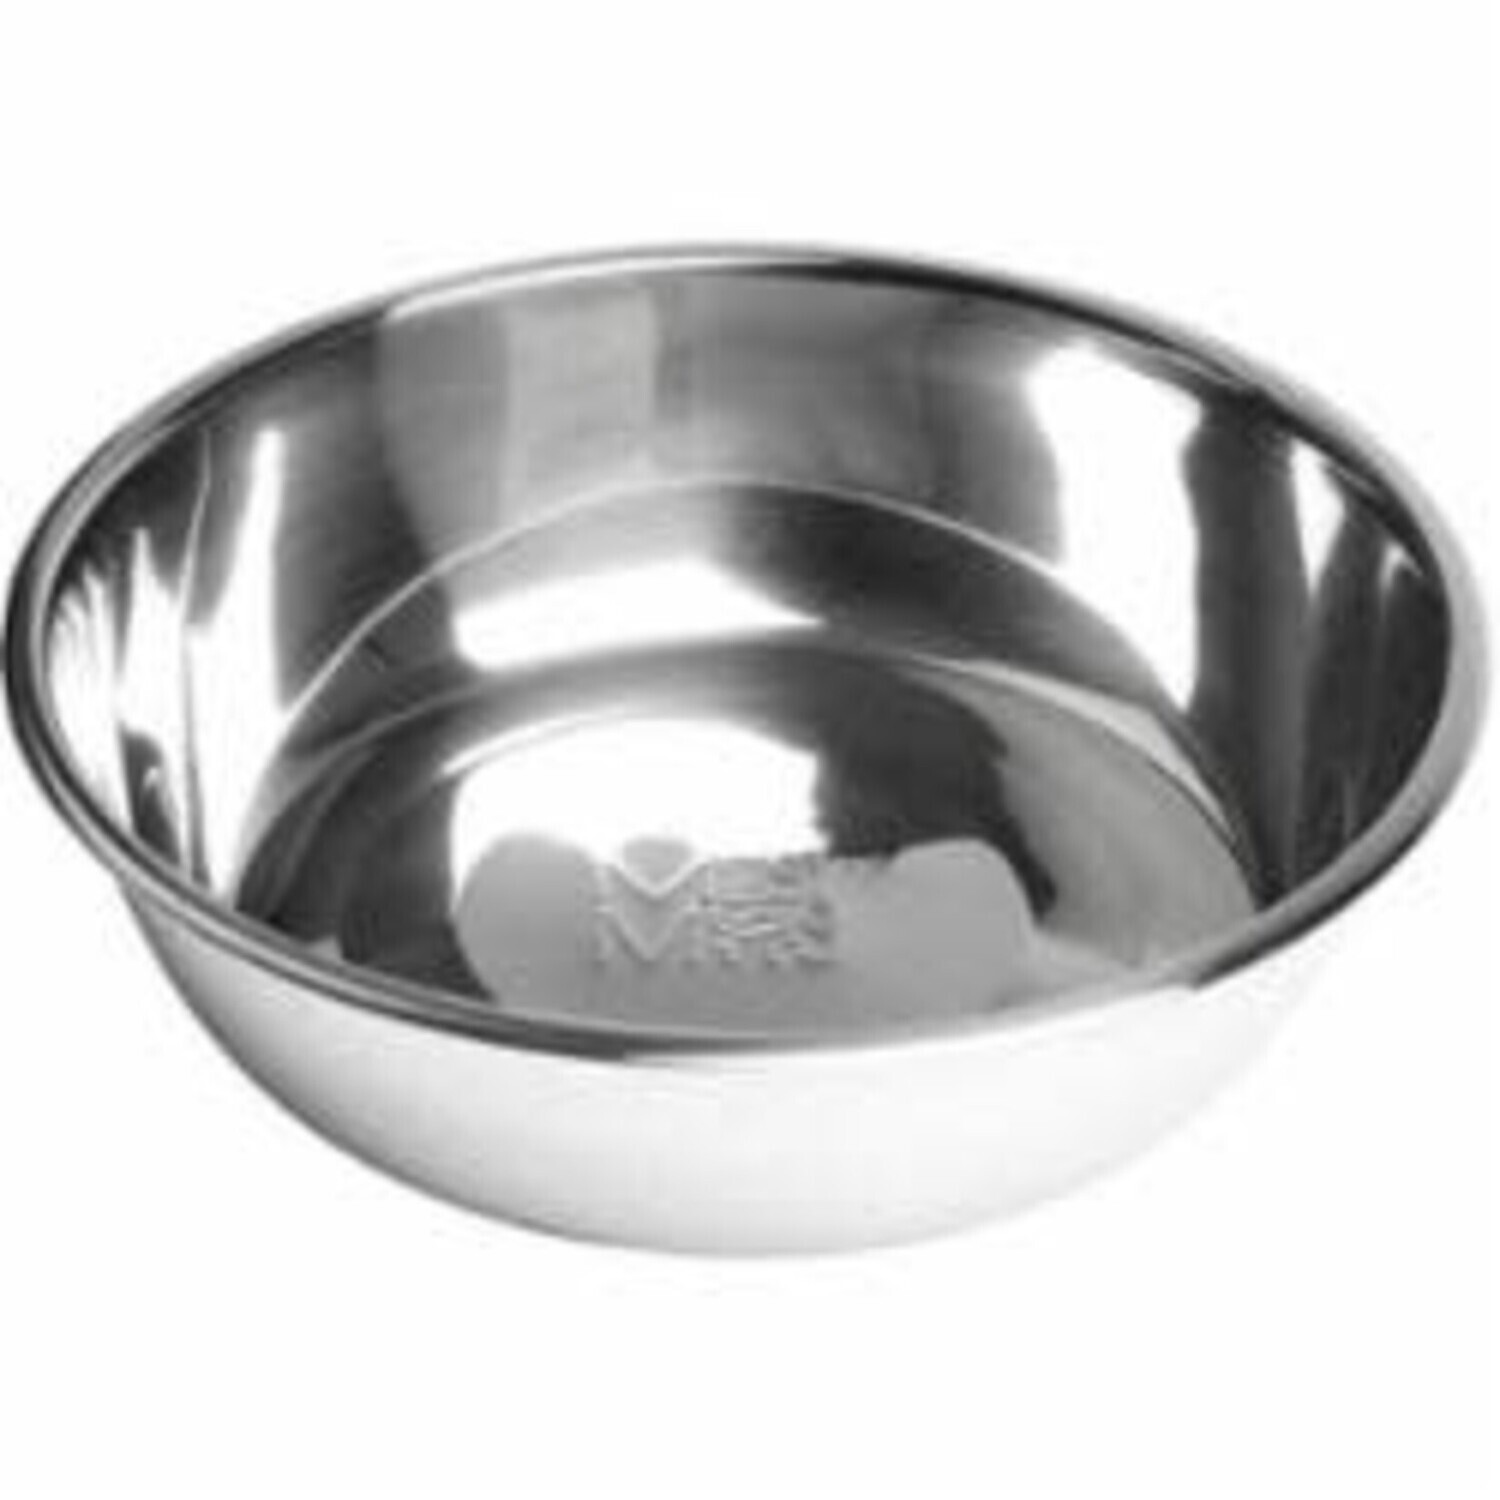 MESSY MUTT DOG BOWL STAINLESS STEEL 3 CUP